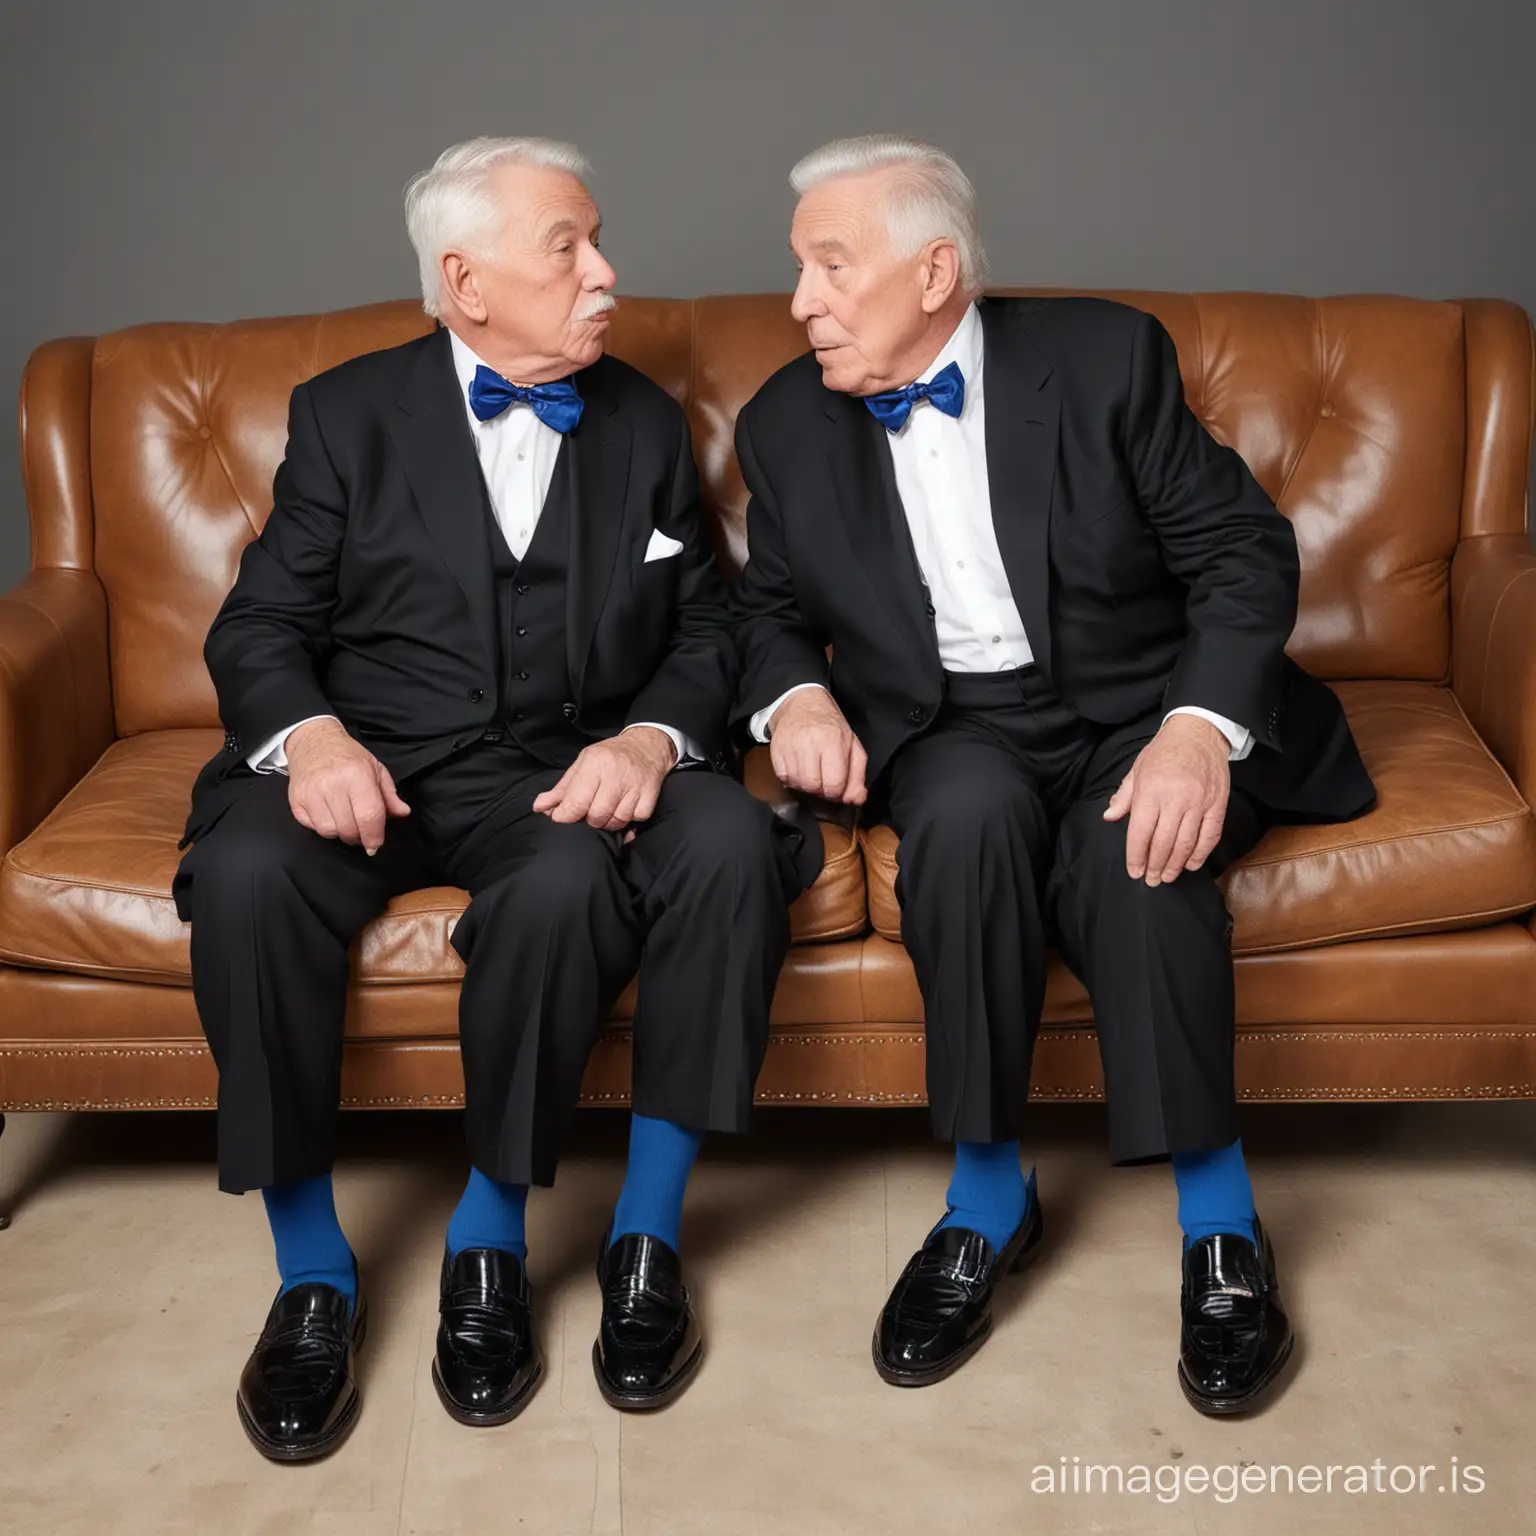 Two American fat elderly men, both 80 years old, shot height, wearing black suits, blue bowties, blue socks, black loafers, black hair, kissing on a coach in the office, full body shot, must show face